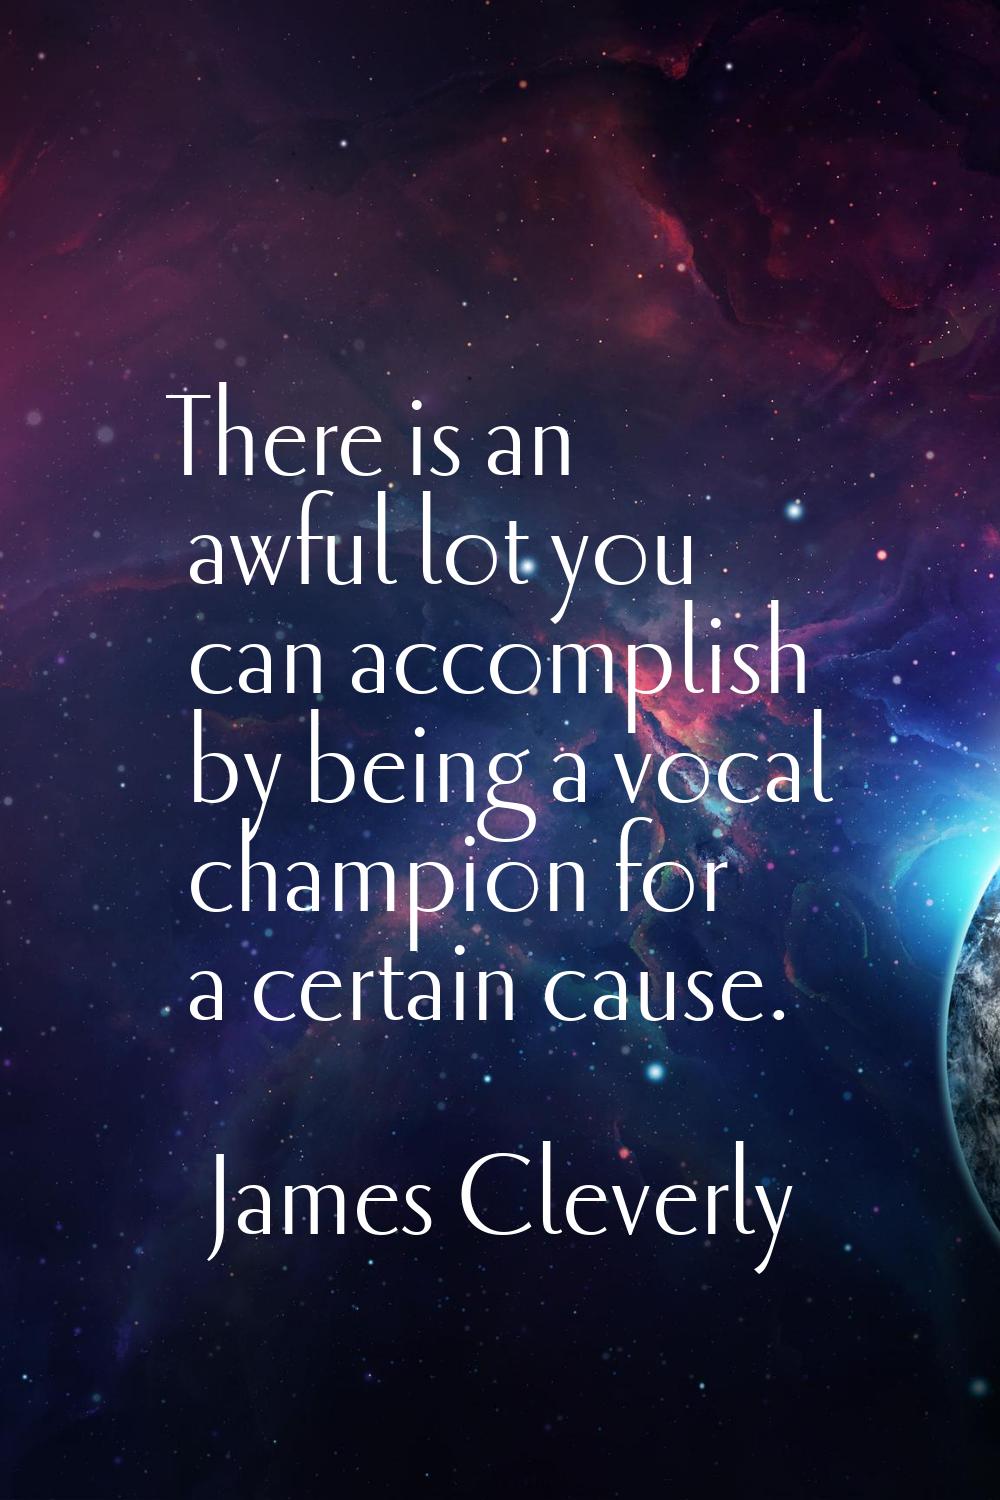 There is an awful lot you can accomplish by being a vocal champion for a certain cause.